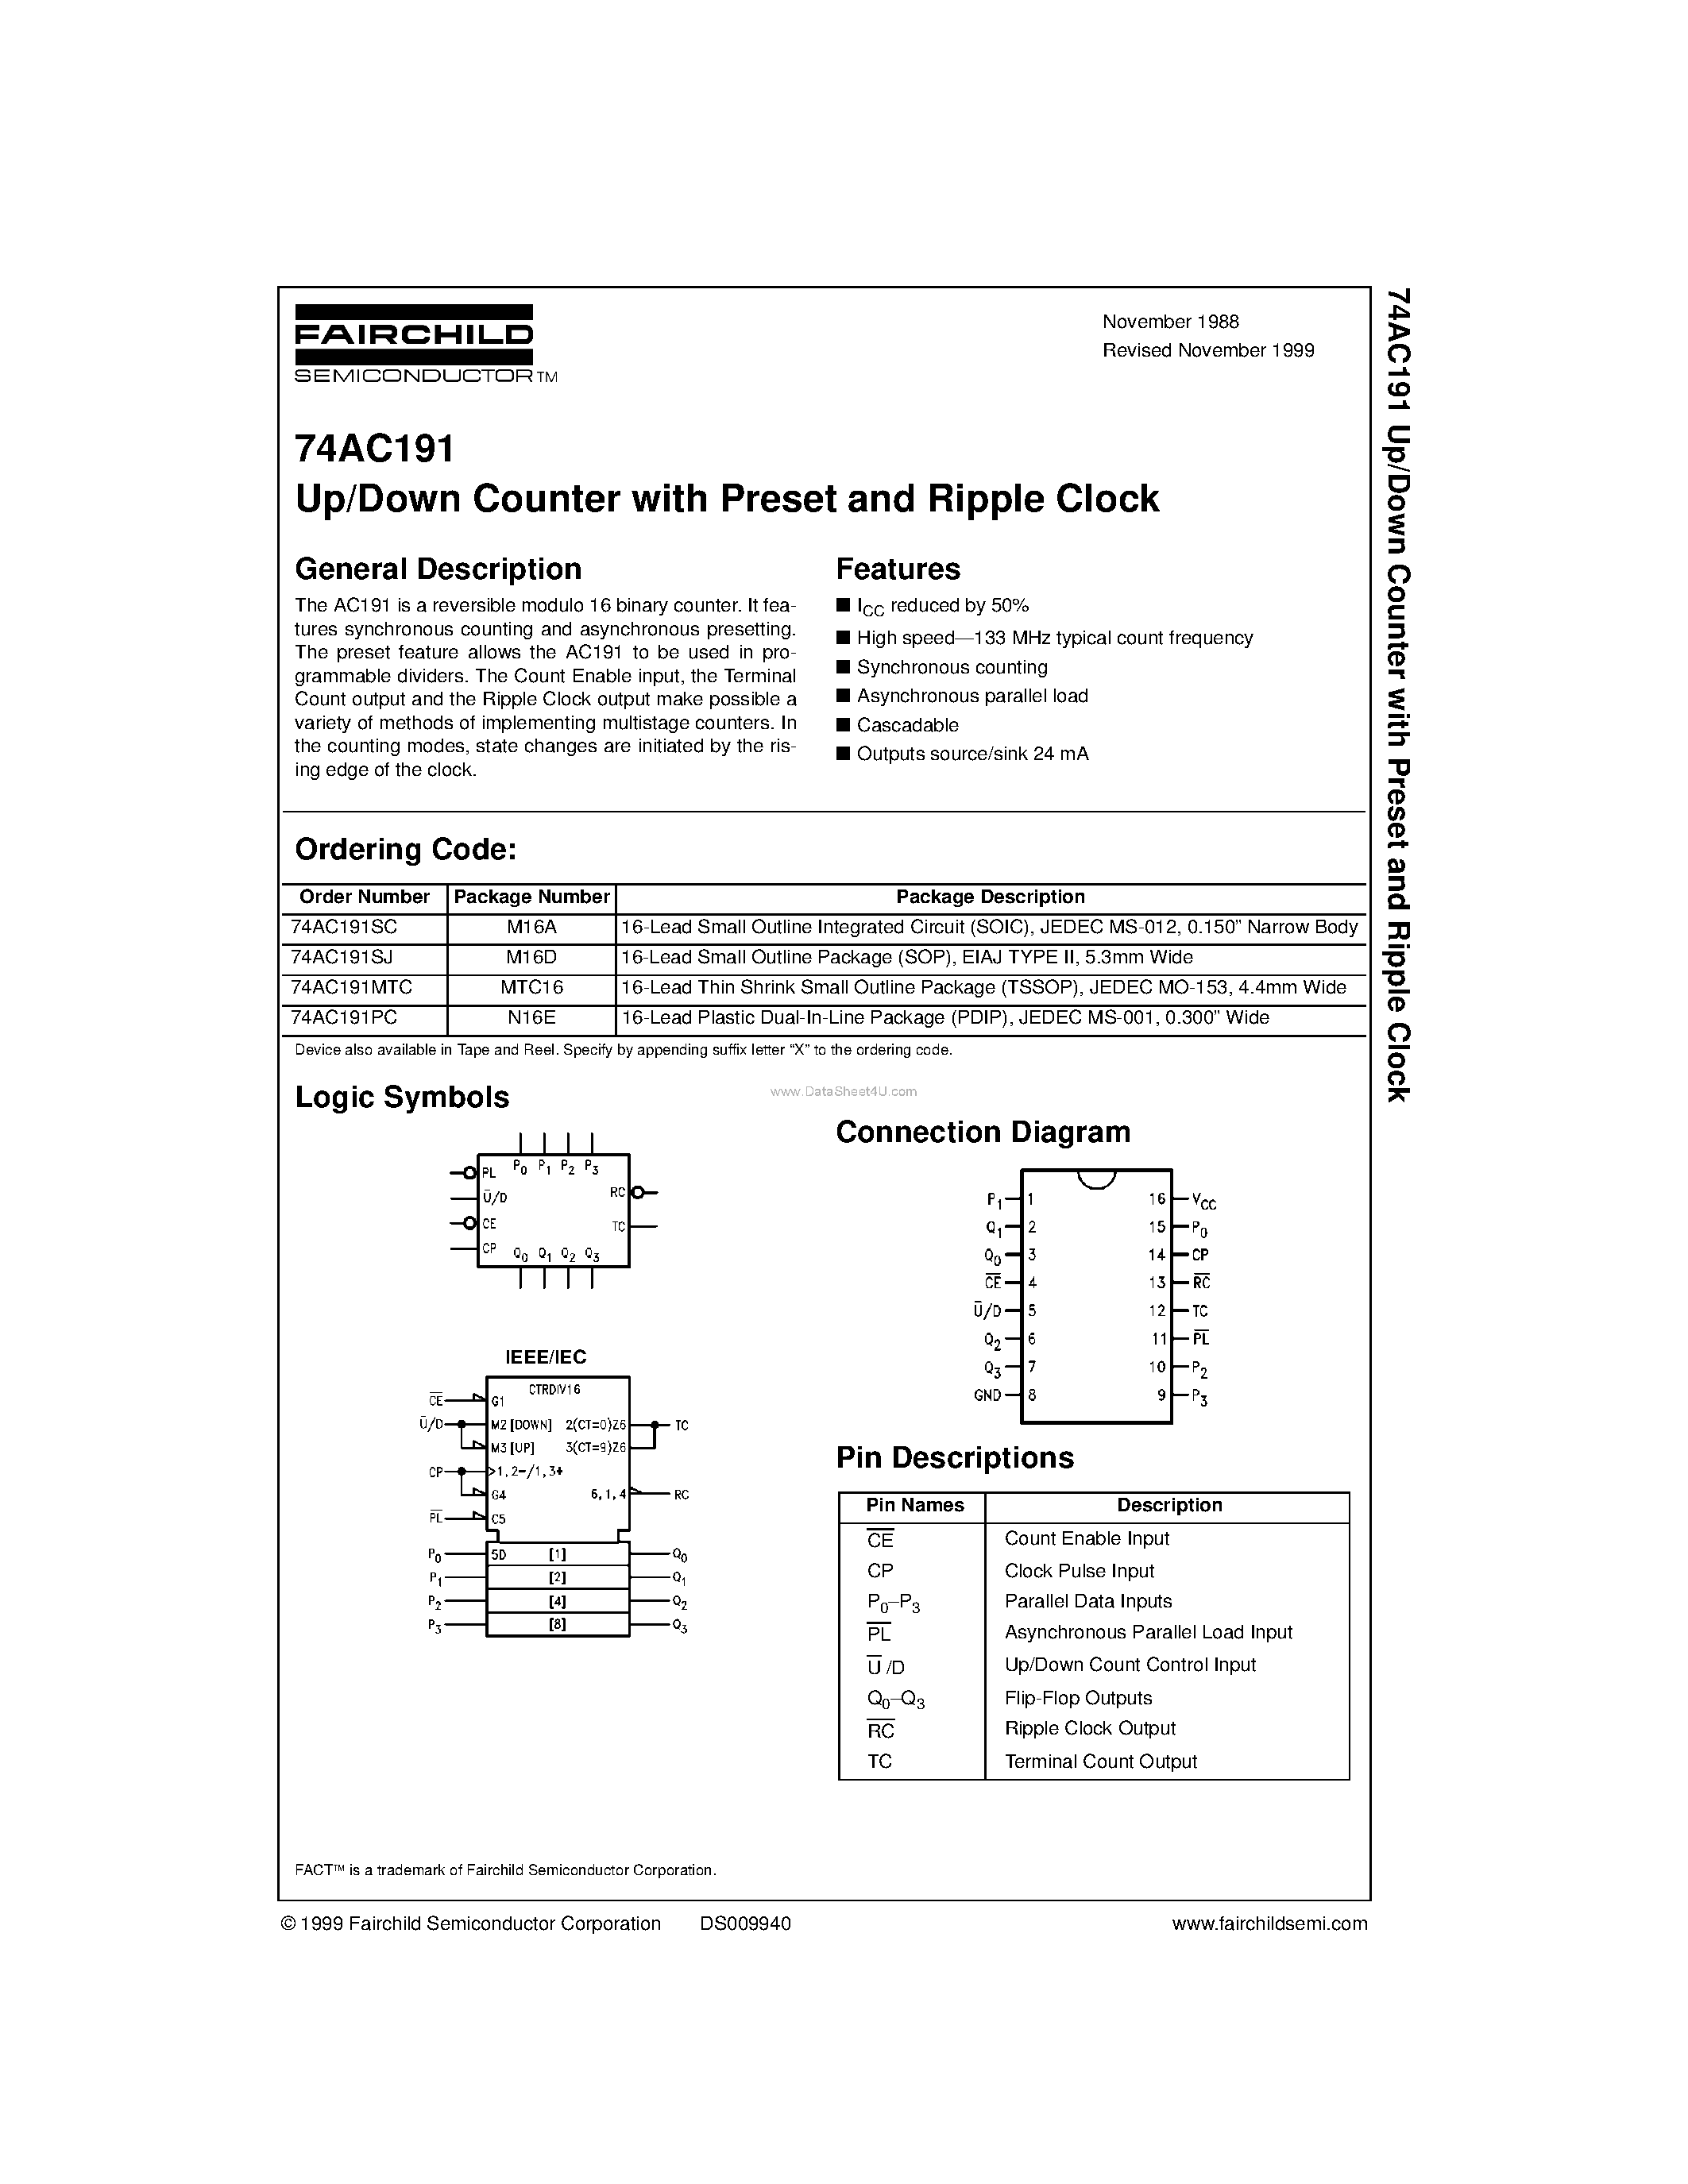 Datasheet 74AC191 - Up/Down Counter with Preset and Ripple Clock page 1